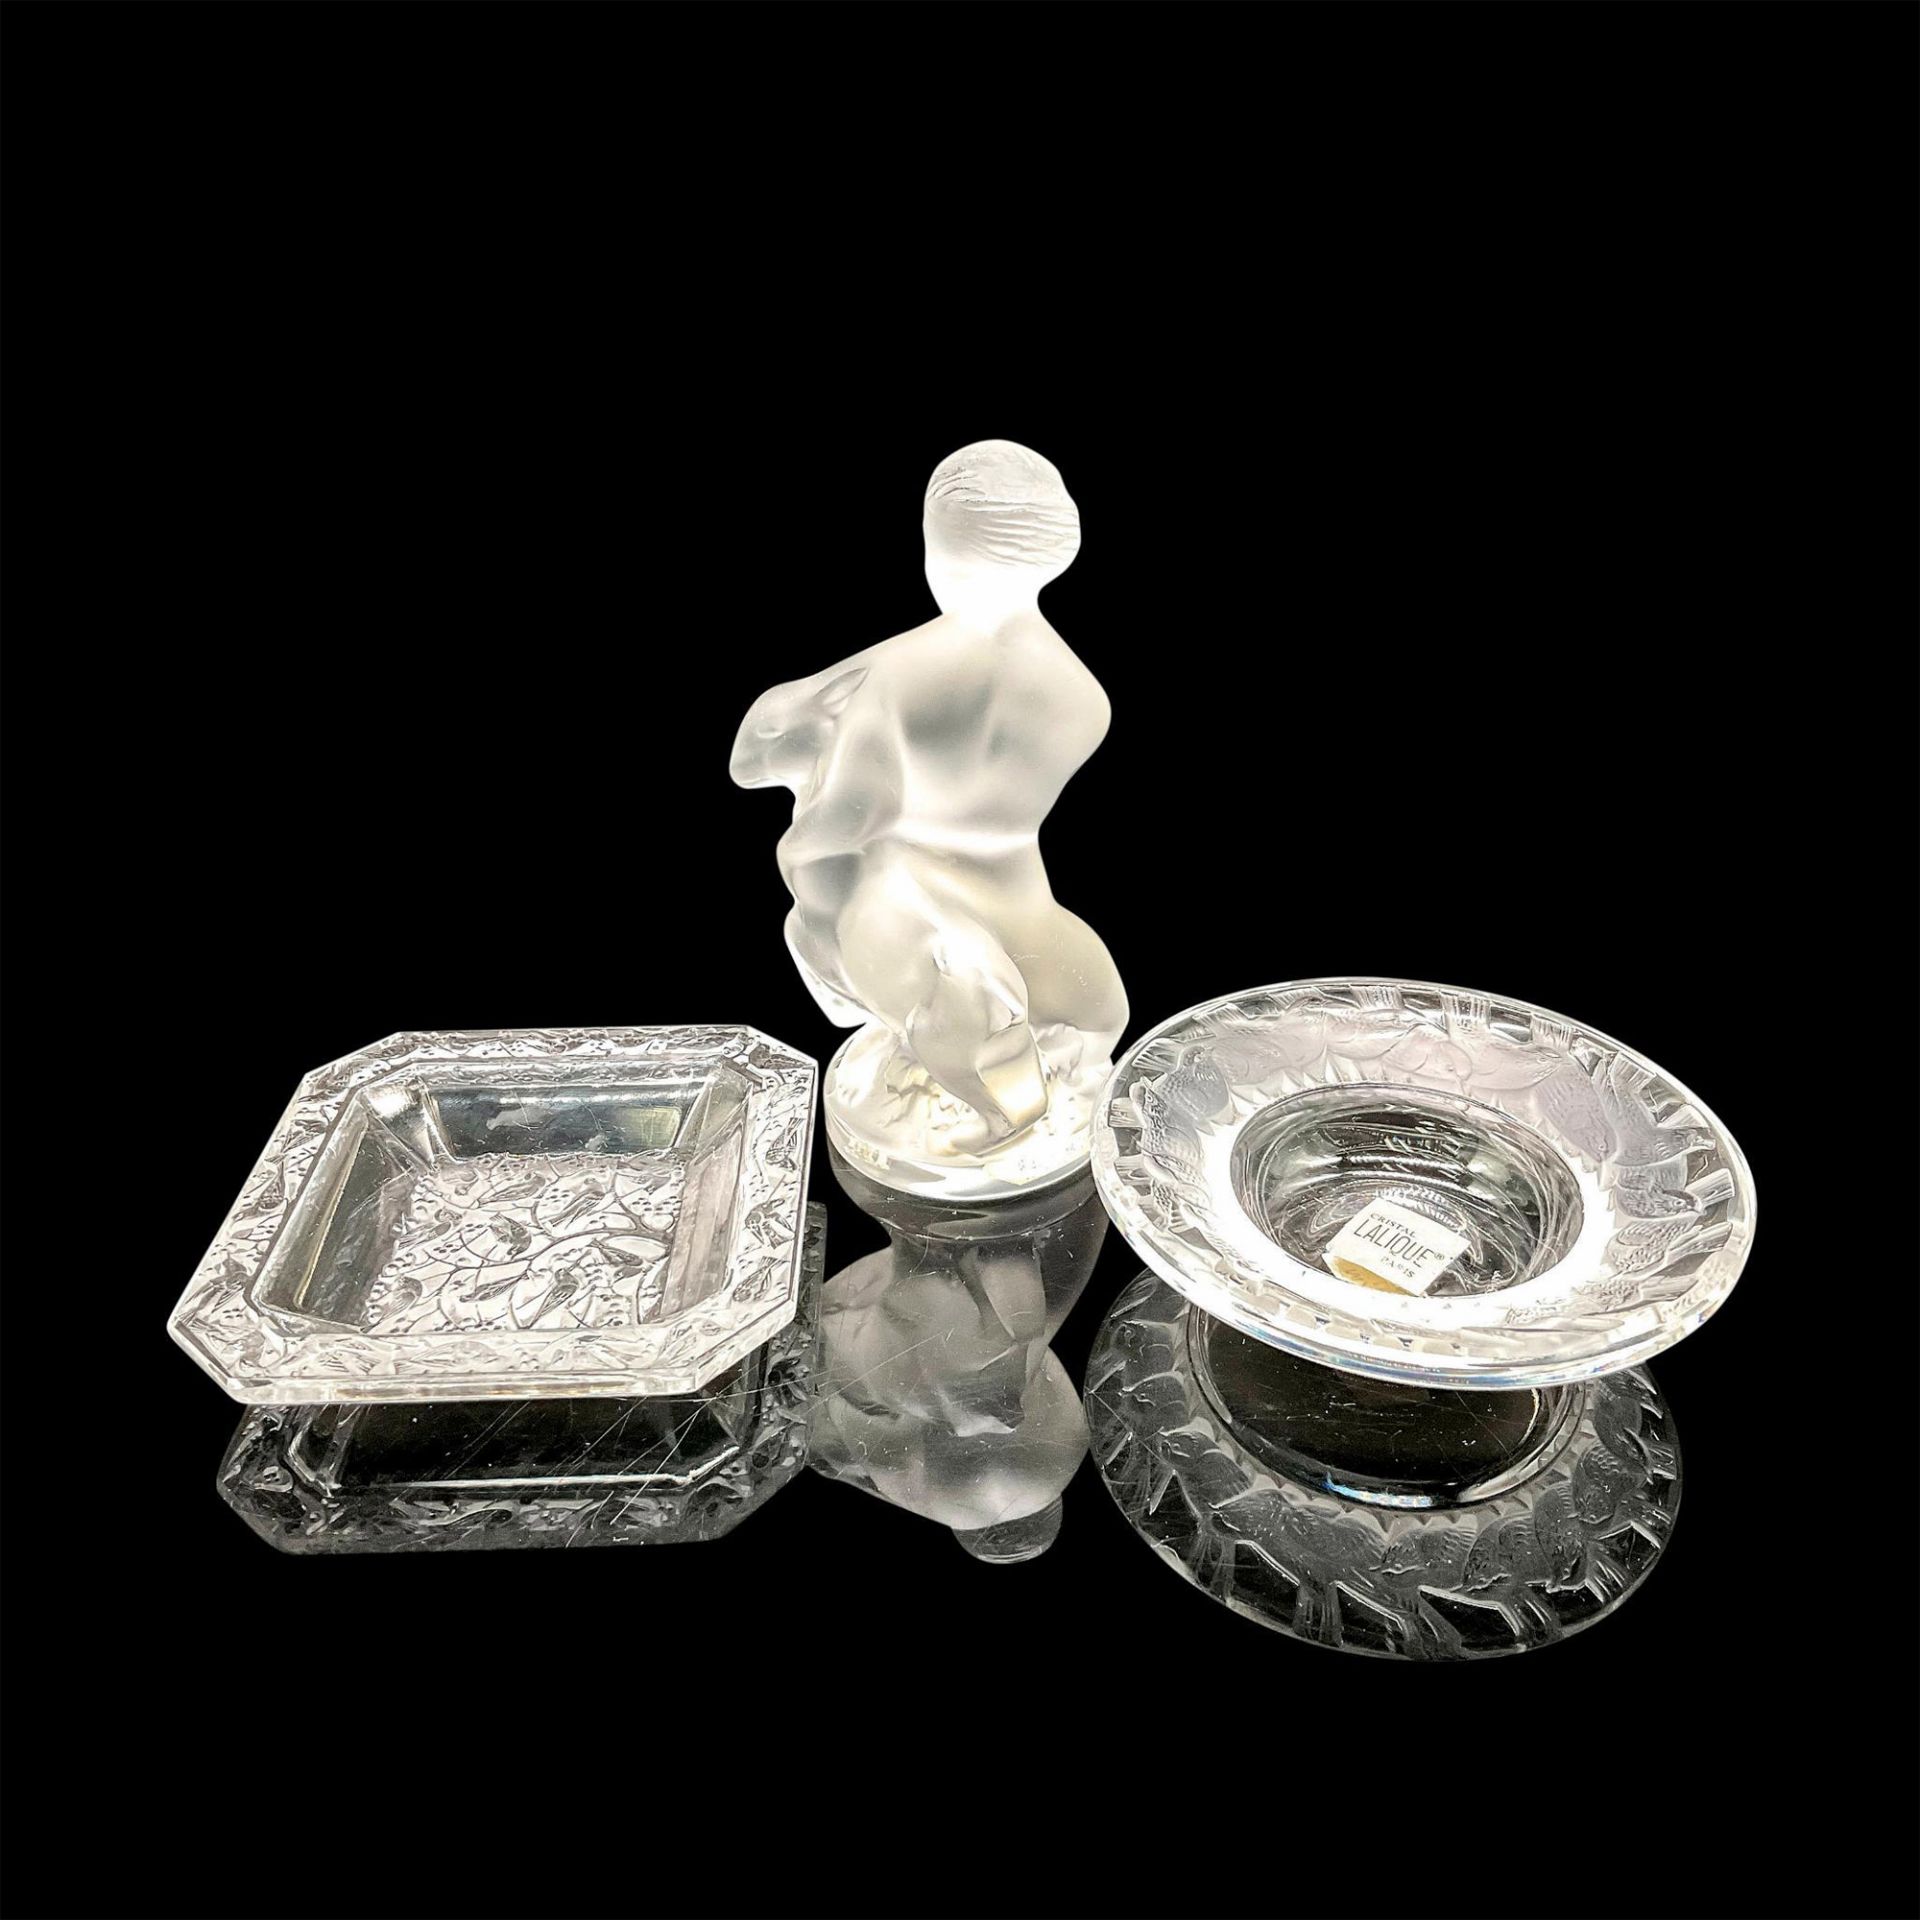 3pc Lalique Crystal Trinket Dishes & Diane Figurine - Image 2 of 3